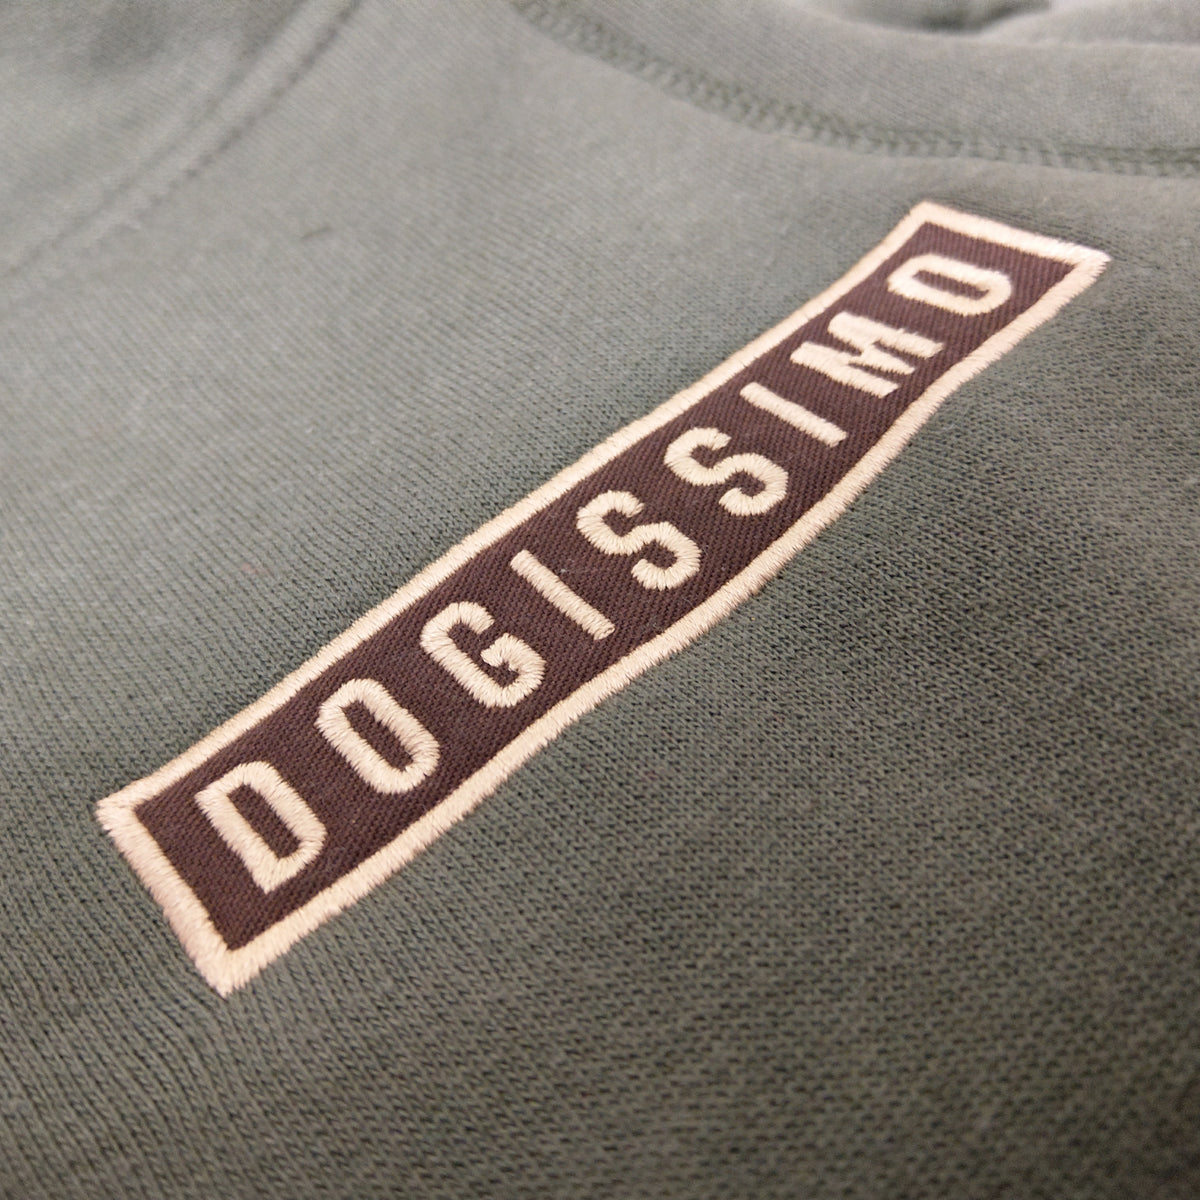 Dogissimo Military Hooded Sweatshirt for Bulldogs